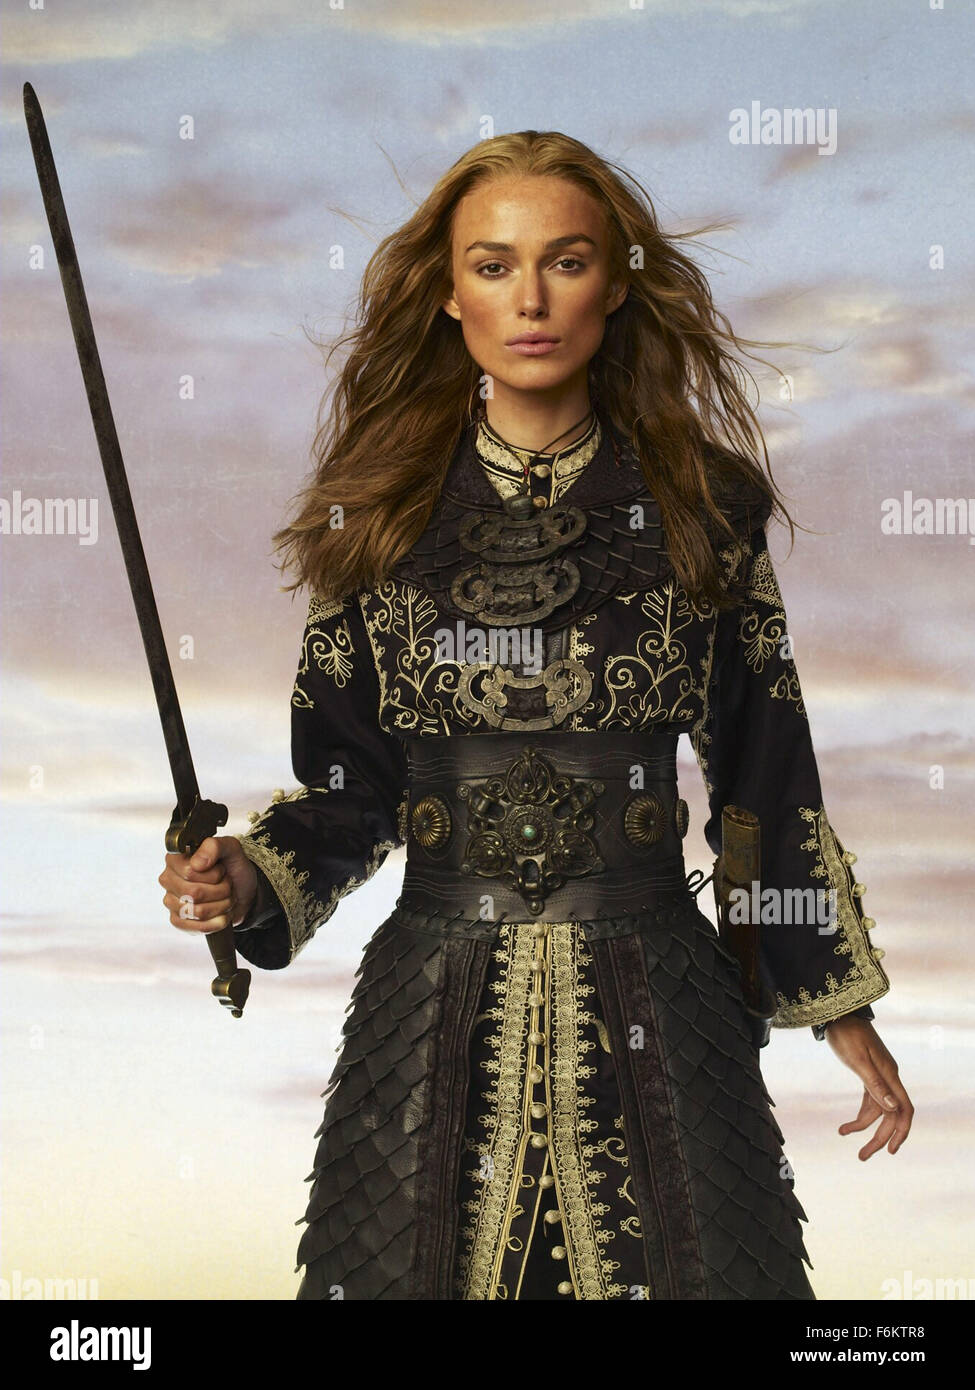 RELEASE DATE: May 25, 2007. STUDIO: Jerry Bruckheimer Films/Walt Disney Pictures. PLOT: Captain Barbossa, Will Turner and Elizabeth Swann must sail off the edge of the map, navigate treachery and betrayal, and make their final alliances for one last decisive battle. PICTURED: KEIRA KNIGHTLEY. Stock Photo